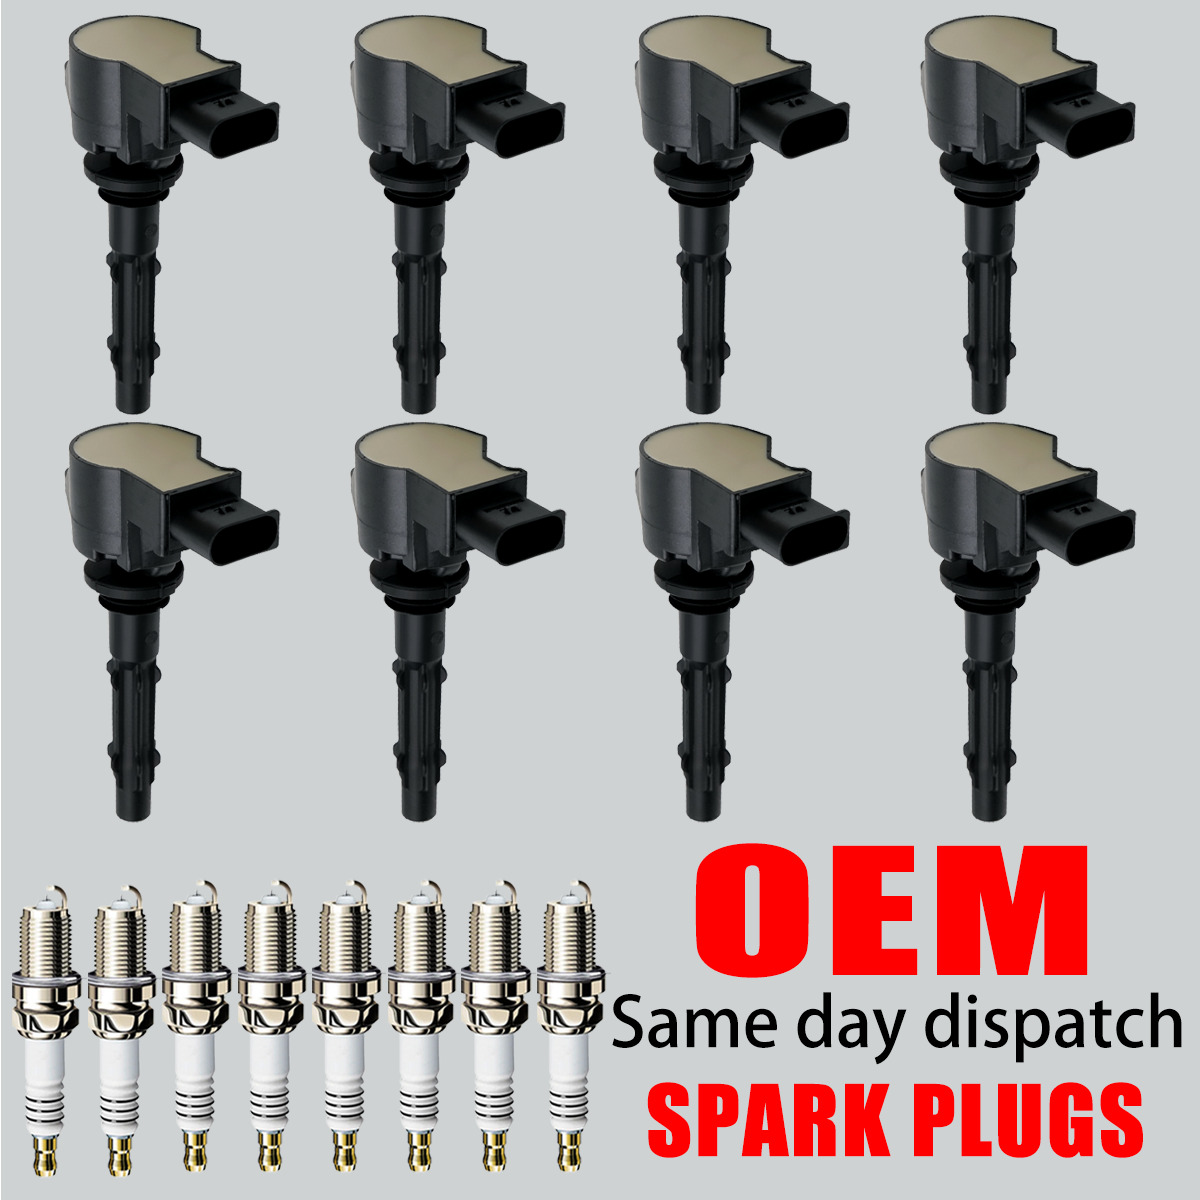 8X OEM Ignition Coil + 8X Spark Plugs for Mercedes-Benz E550 G550 S550 V8 UF535